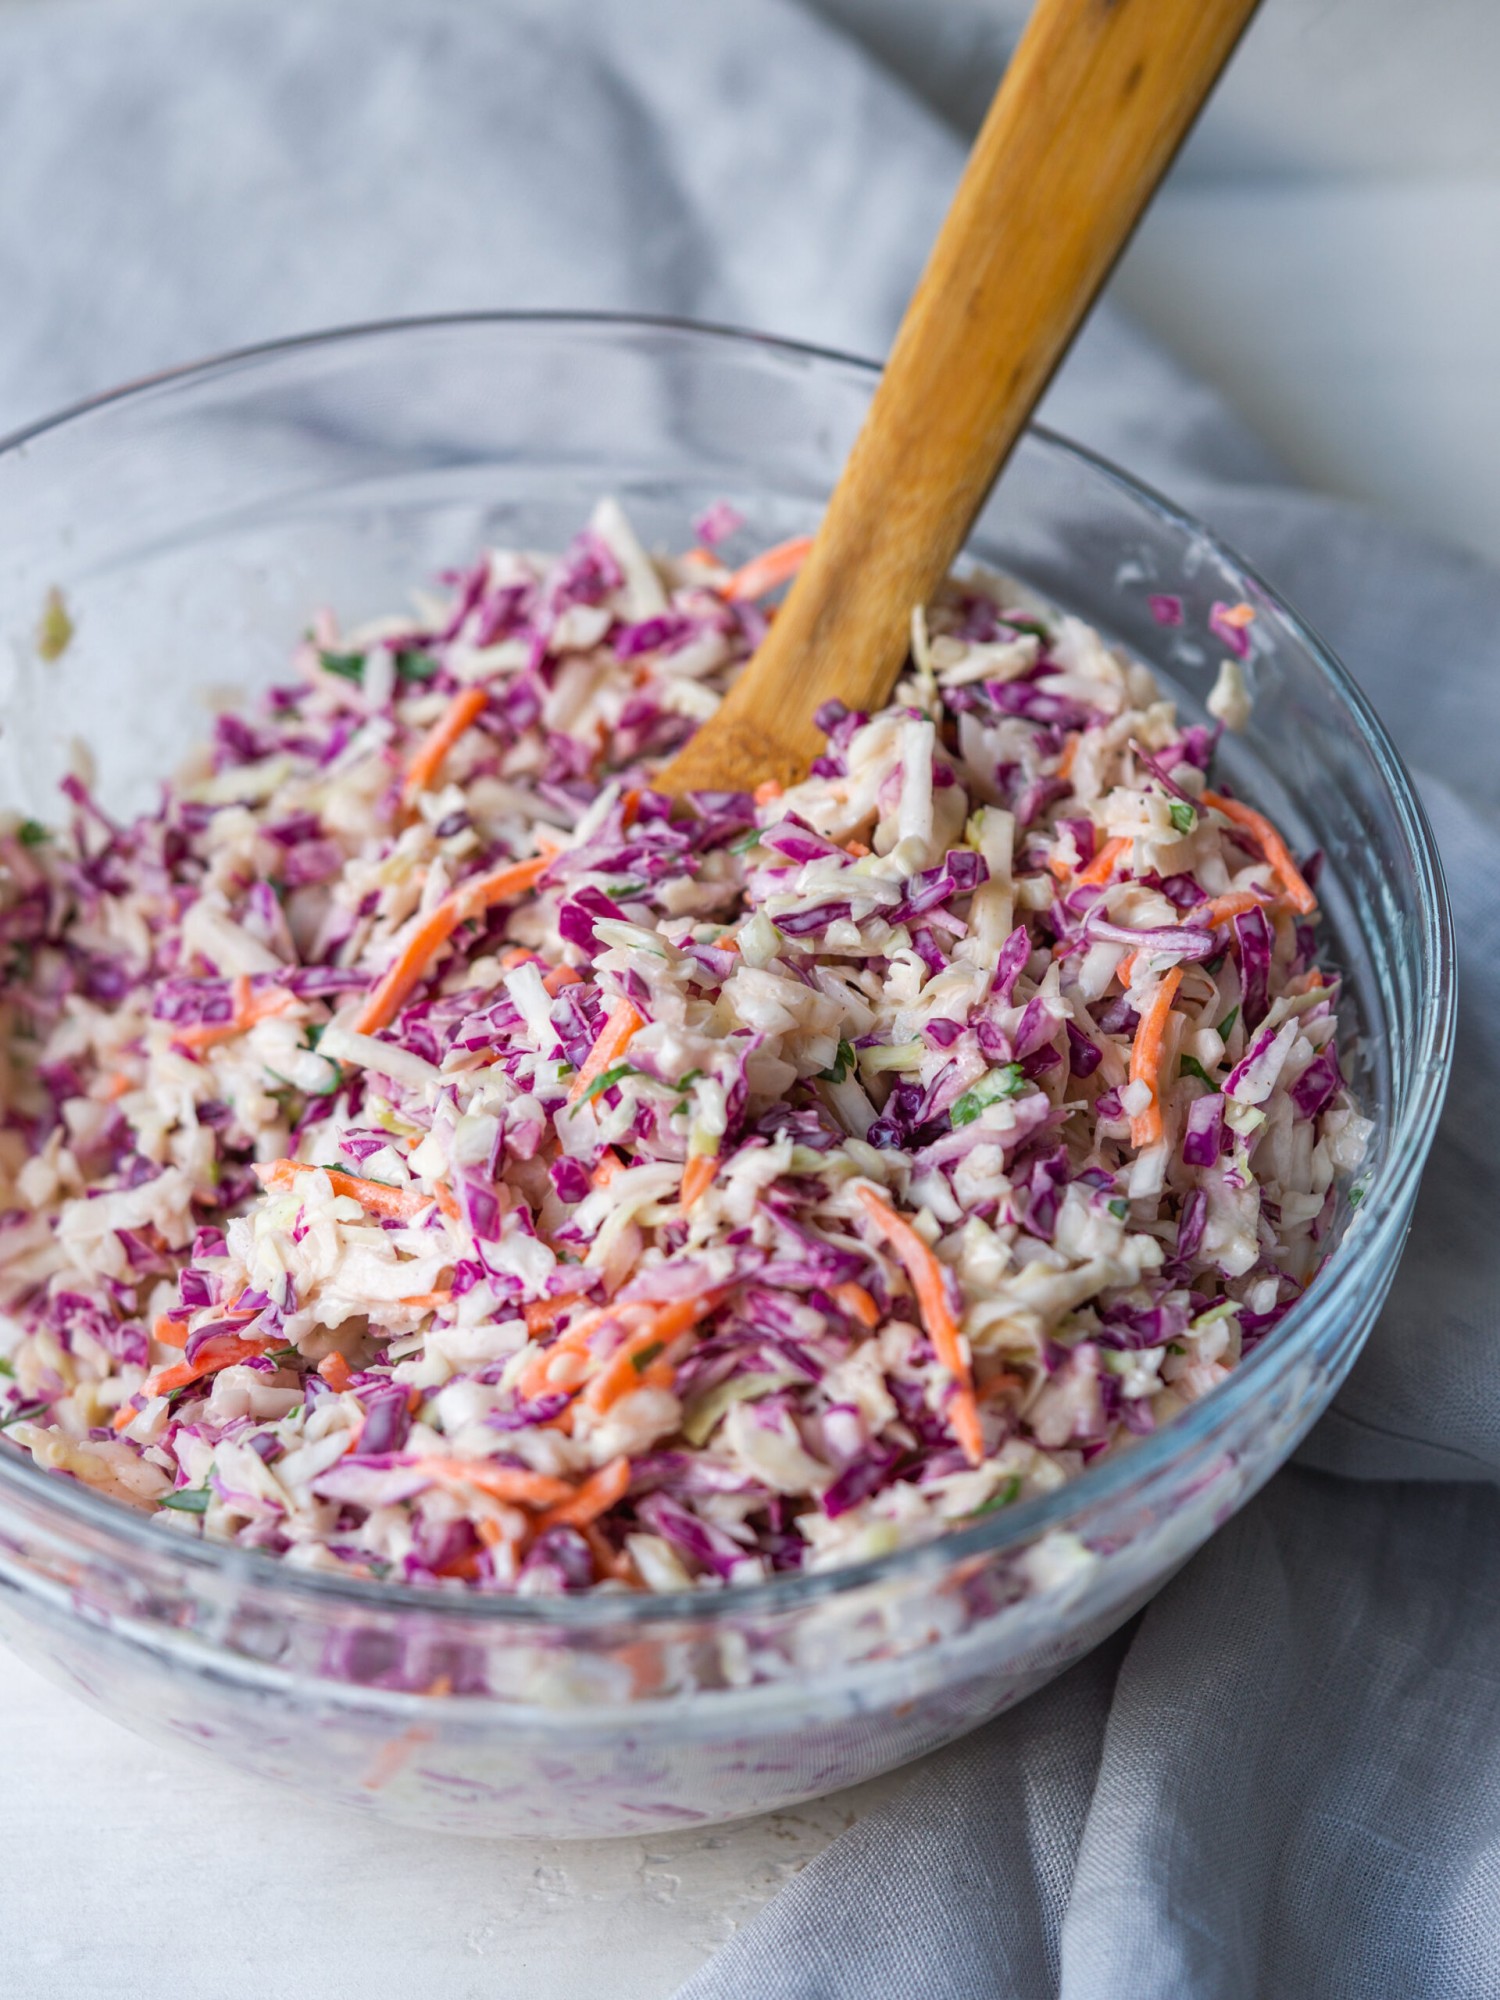 three quarter view of coleslaw in a bowl